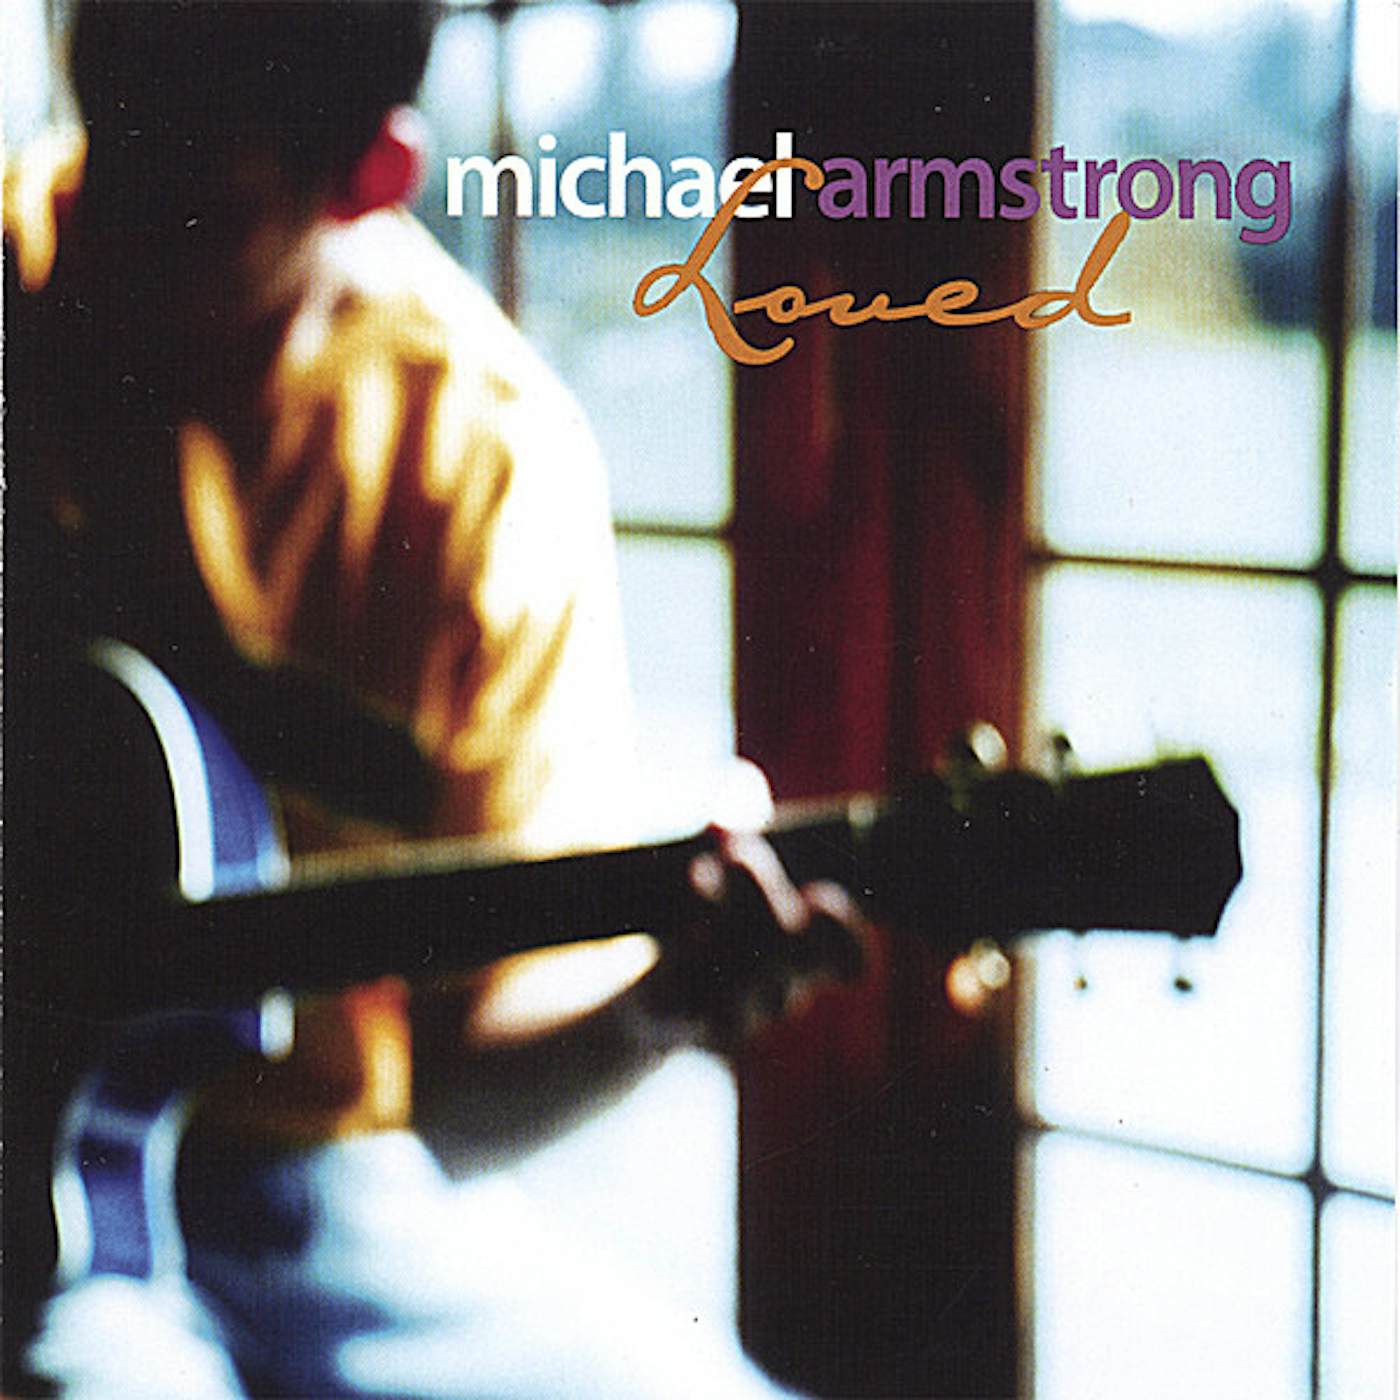 Michael Armstrong LOVED CD